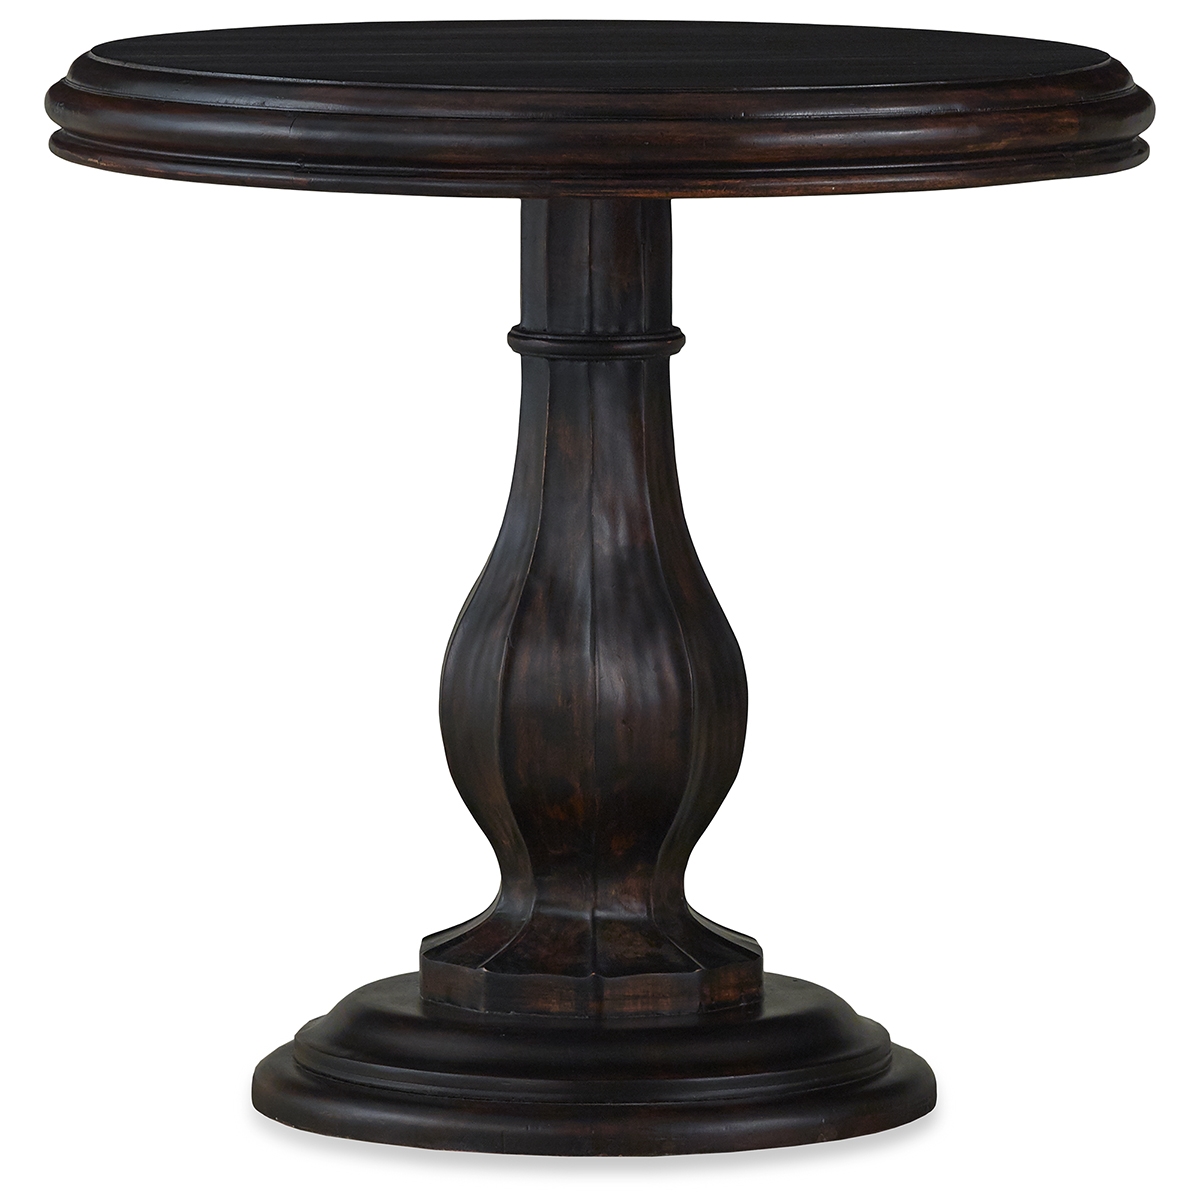 french quarter vintage black side table round pedestal accent vdk mahogany larger email friend ethan allen nesting tables living room decor white wood small barn door console